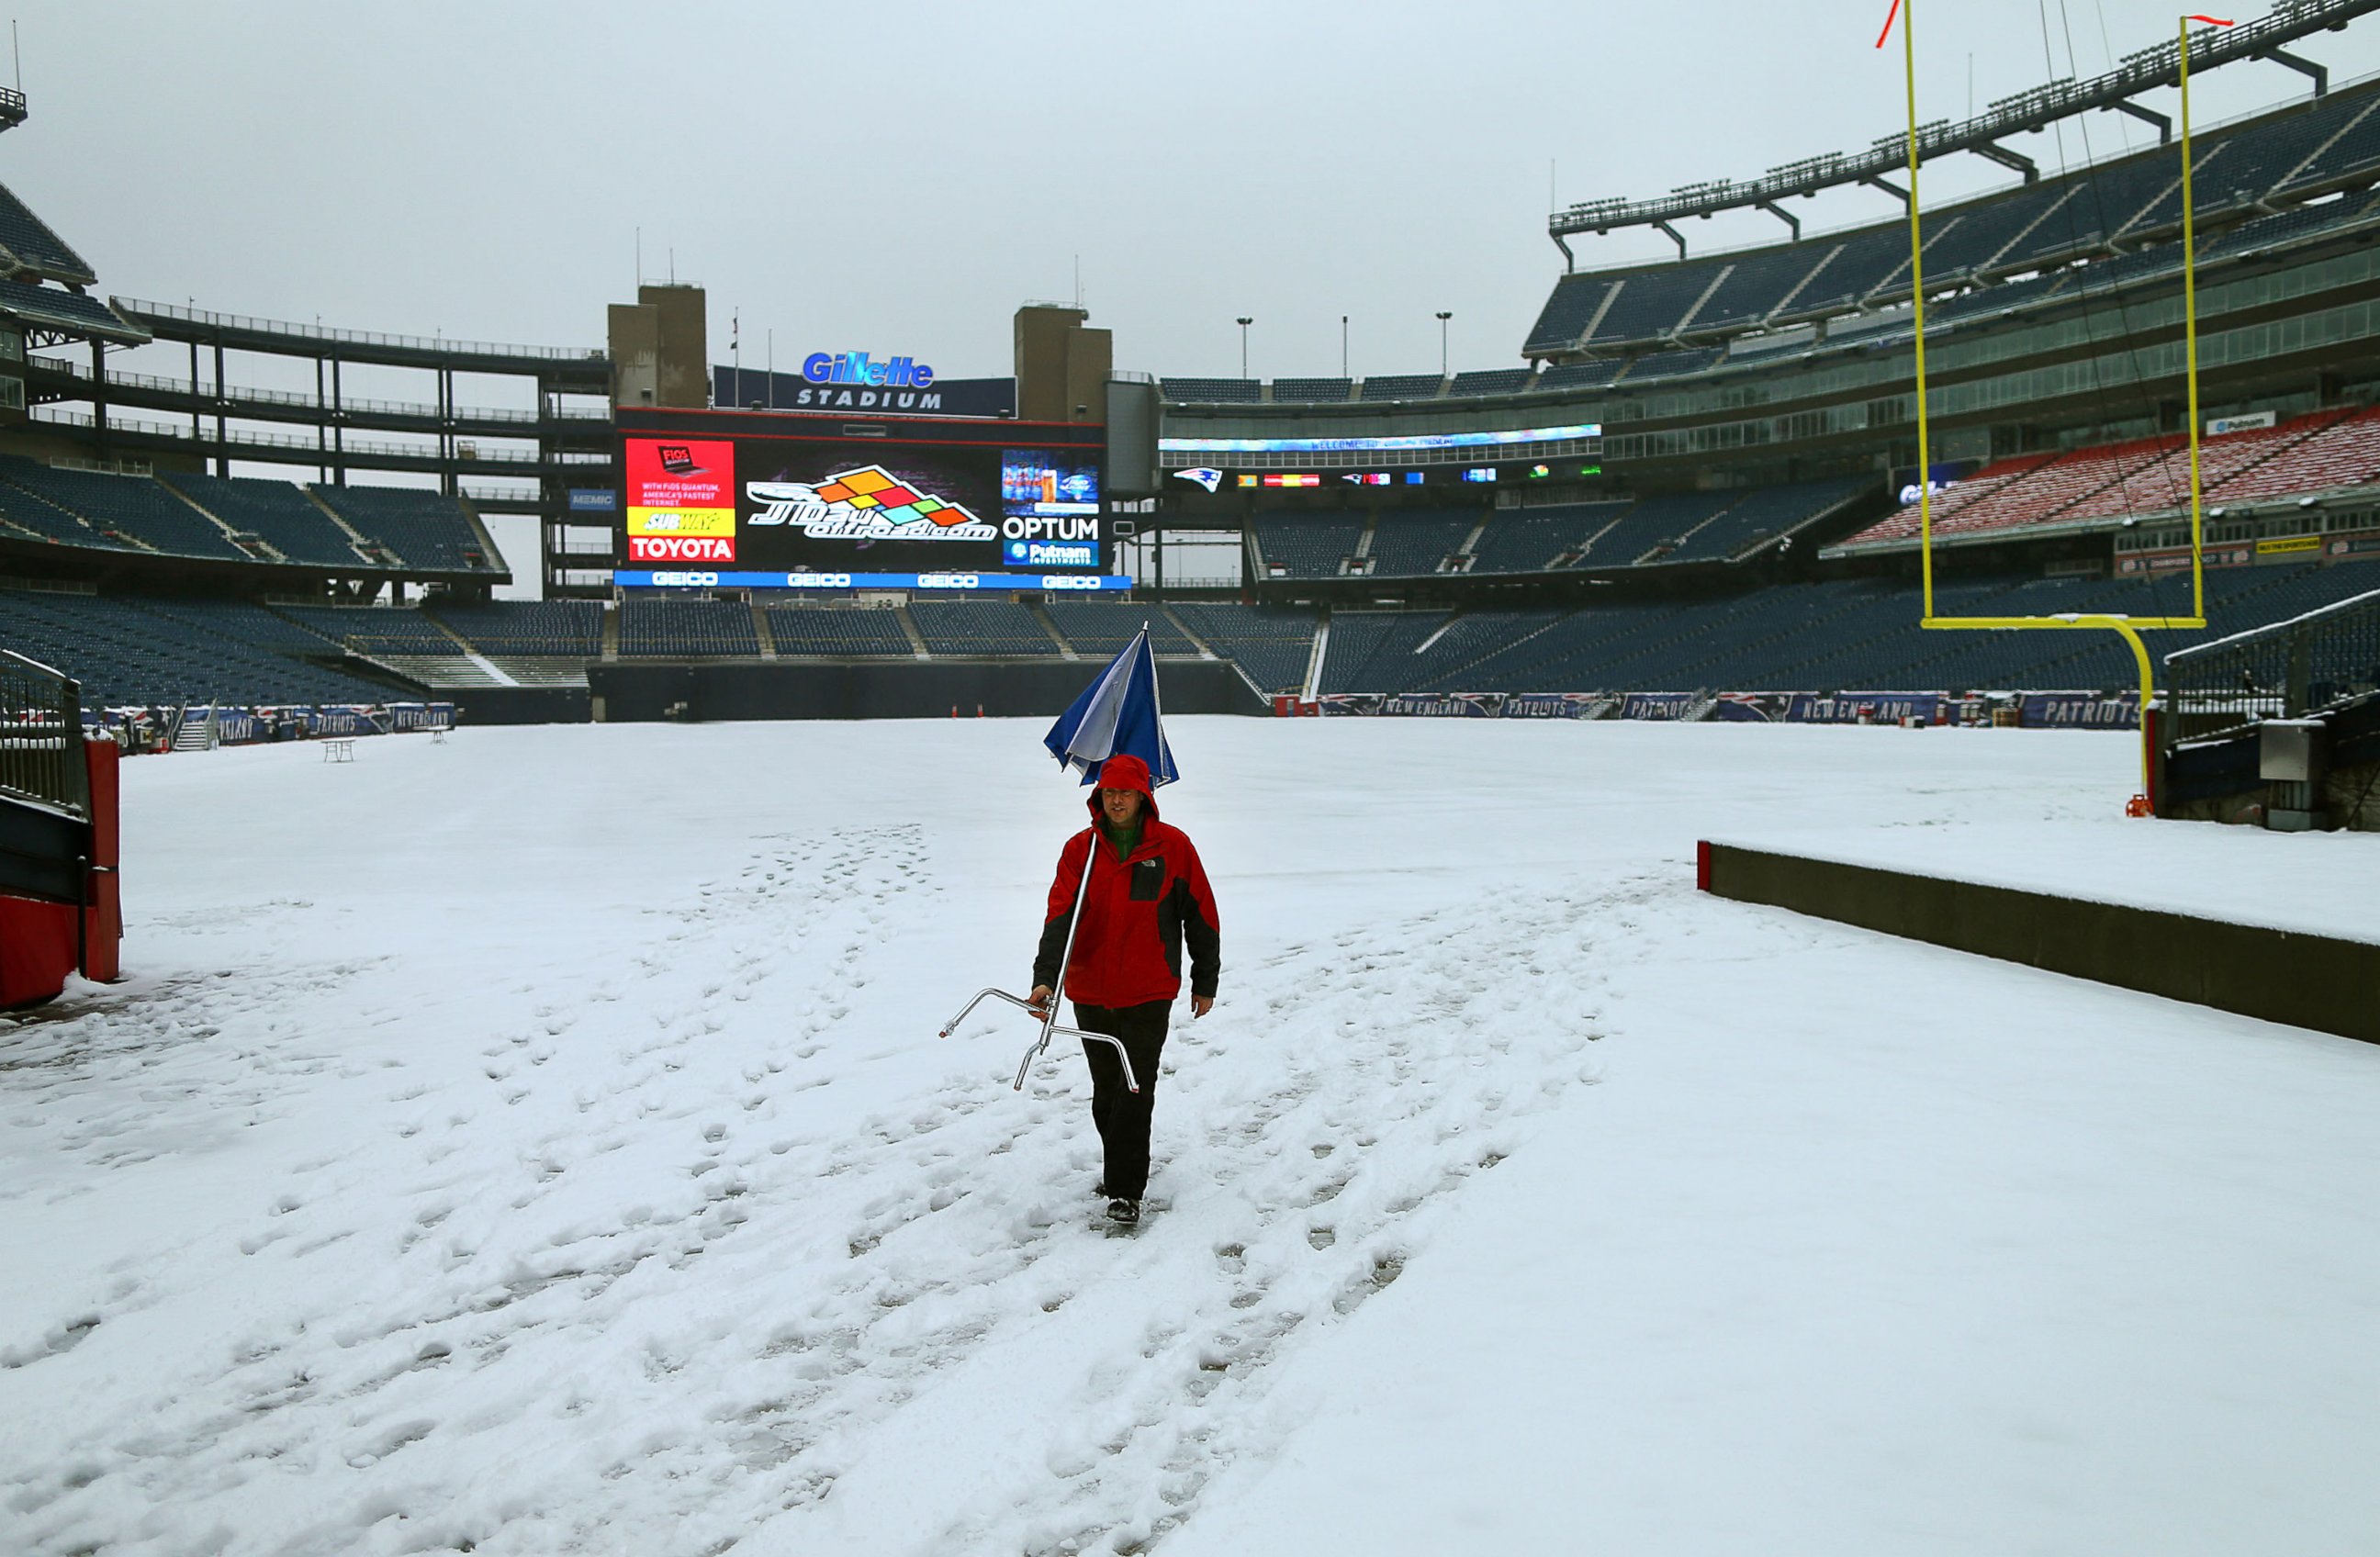 PHOTO:  Snow covers the field at Gillette Stadium as a tv crew member walks by with an umbrella and stand, on Jan. 24, 2015.